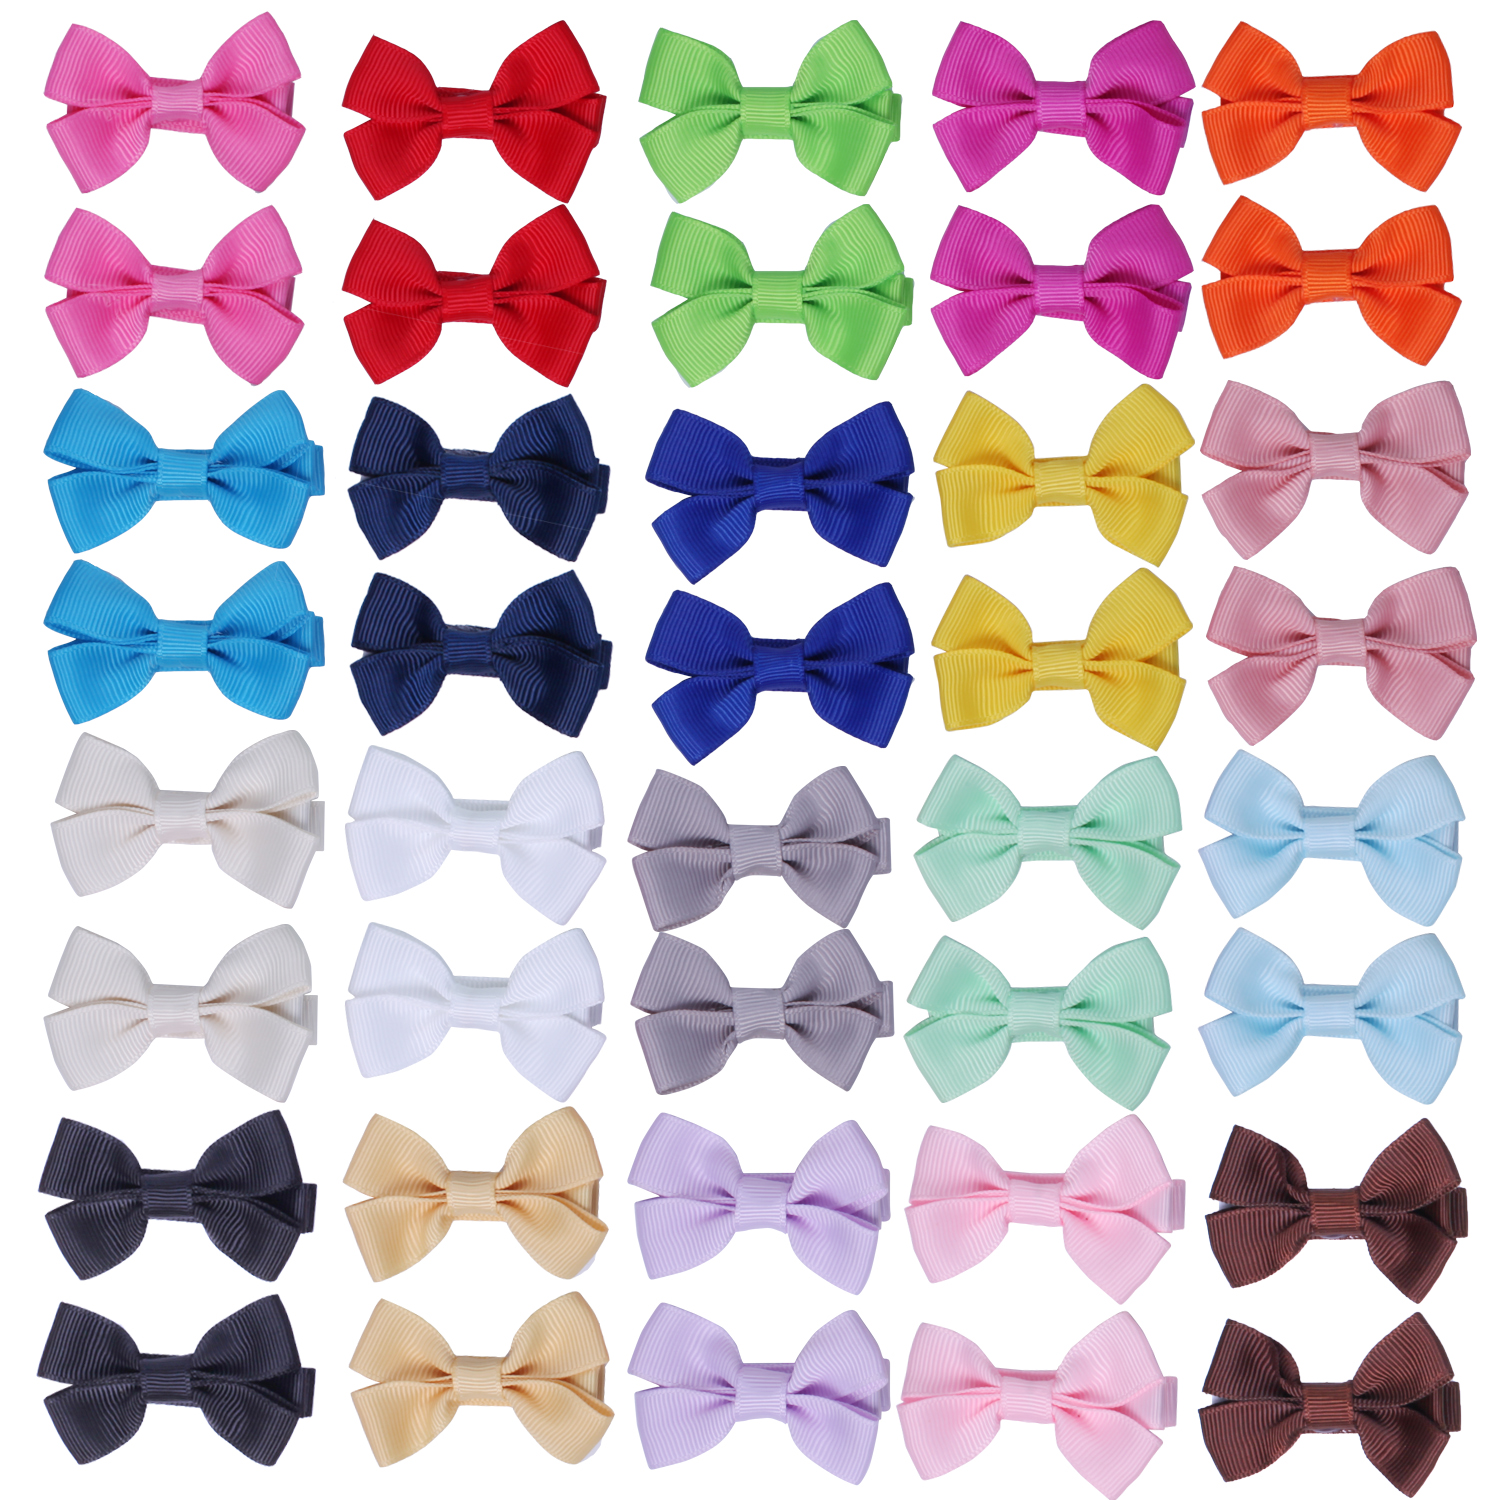 20 pair 2 inch Hair Bows for Girls Baby Toddlers Hair Clips Hair Bow Barrette